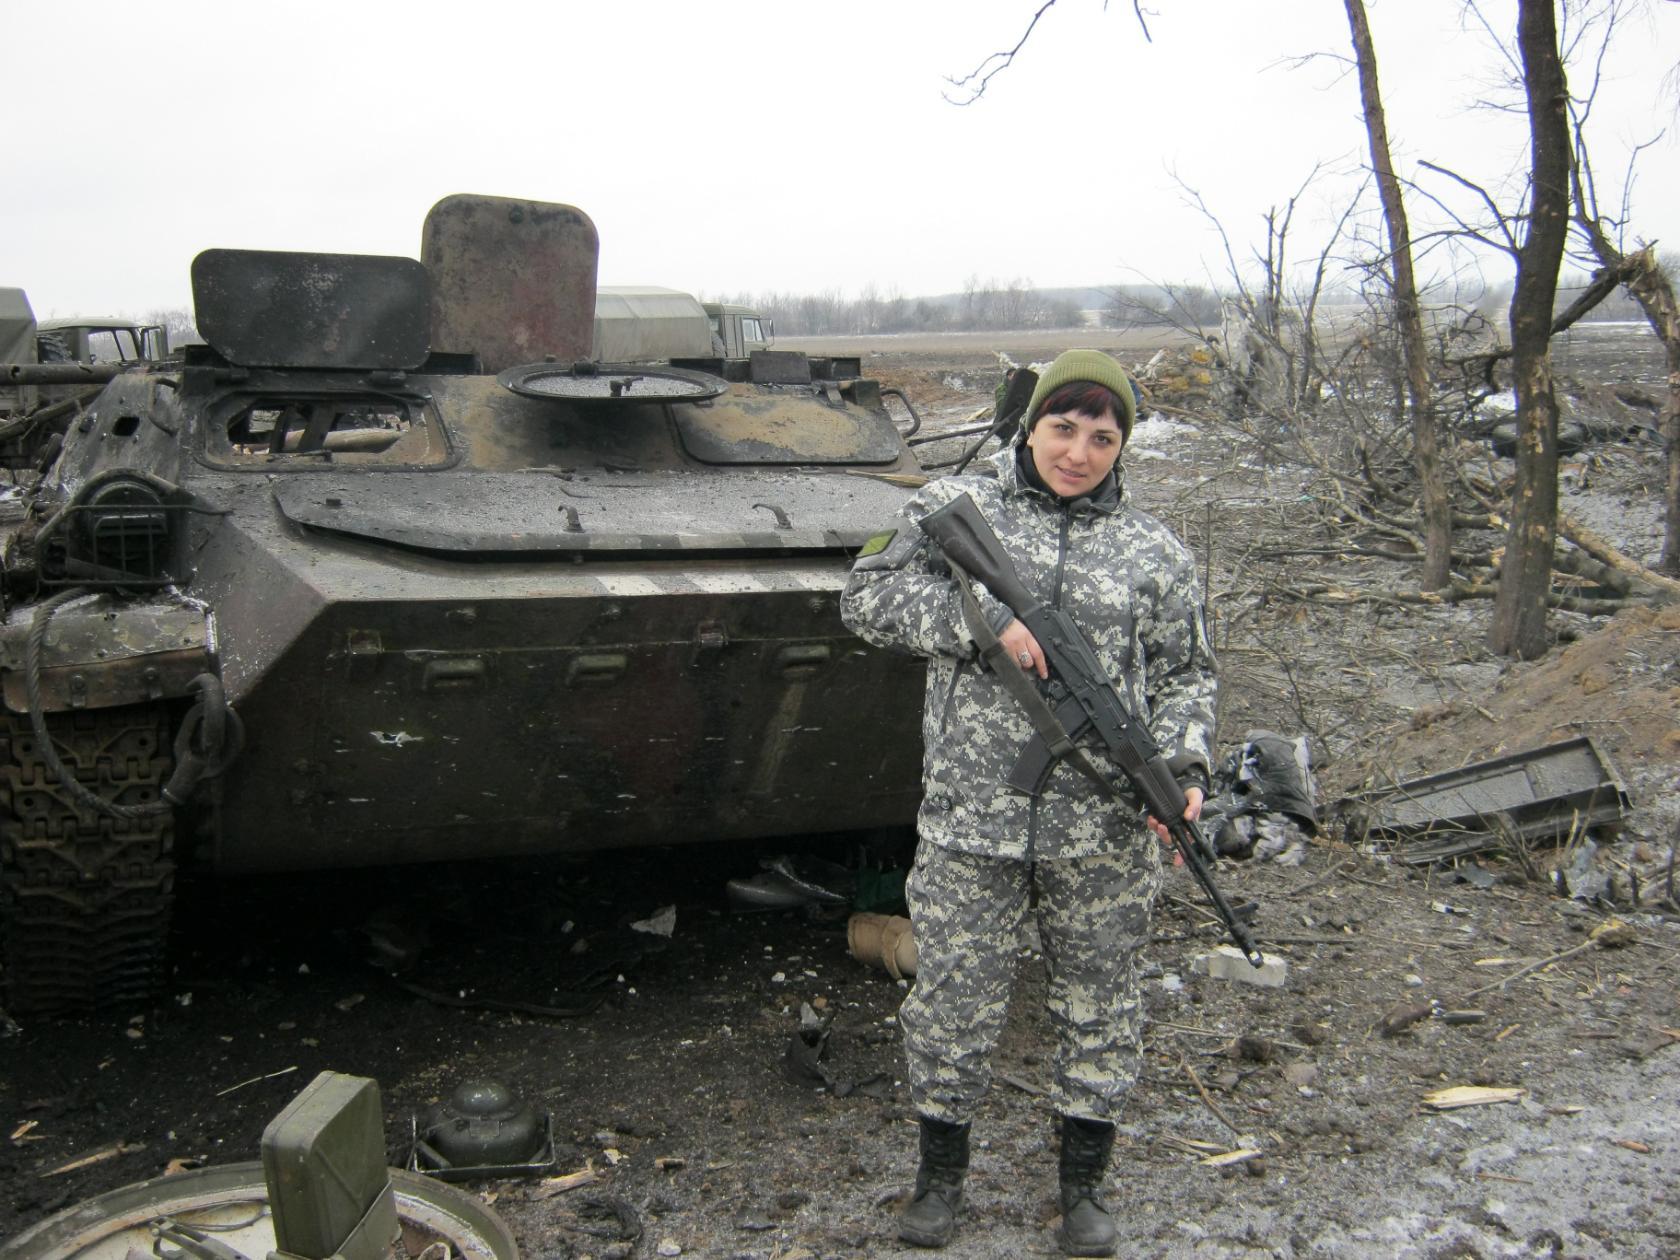 Svitlana Driuk pictured within the ranks of Russian-led forces in the Donbas war zone.